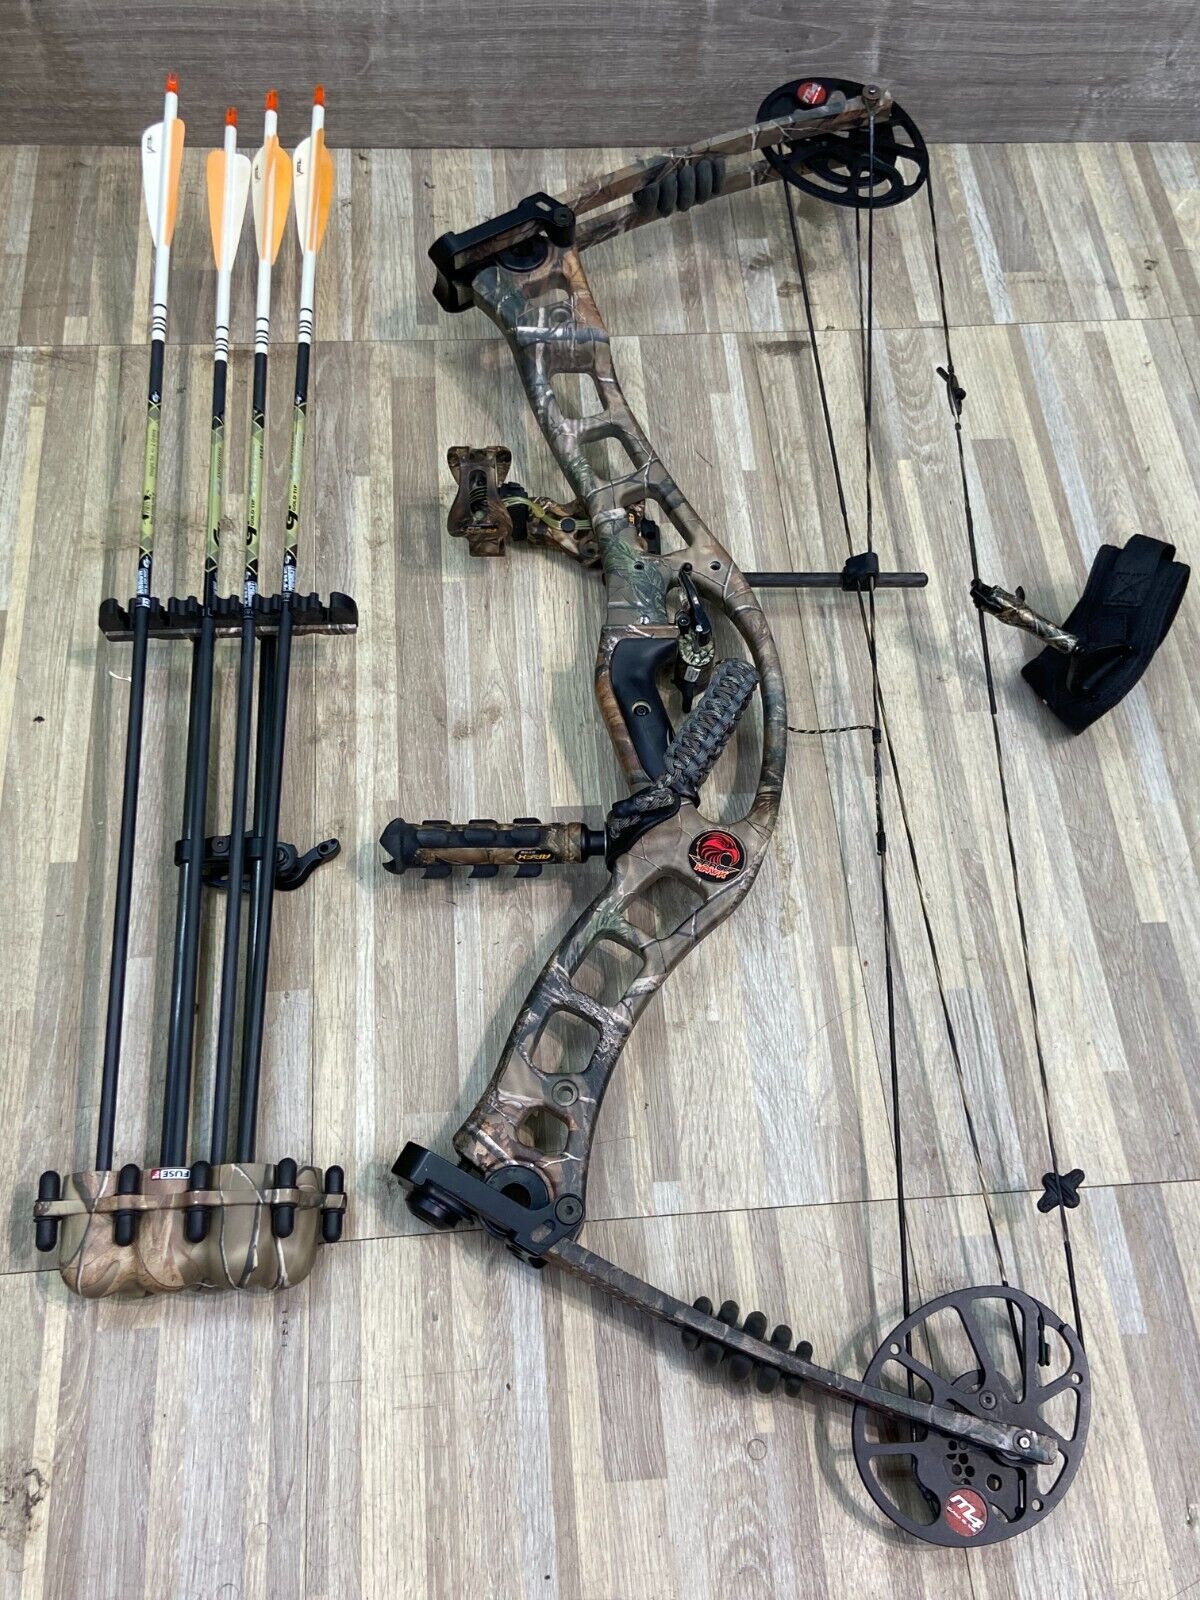 Hoyt: ProHawk, Compound Bow - Right-Handed, 27-30", 40-50lb